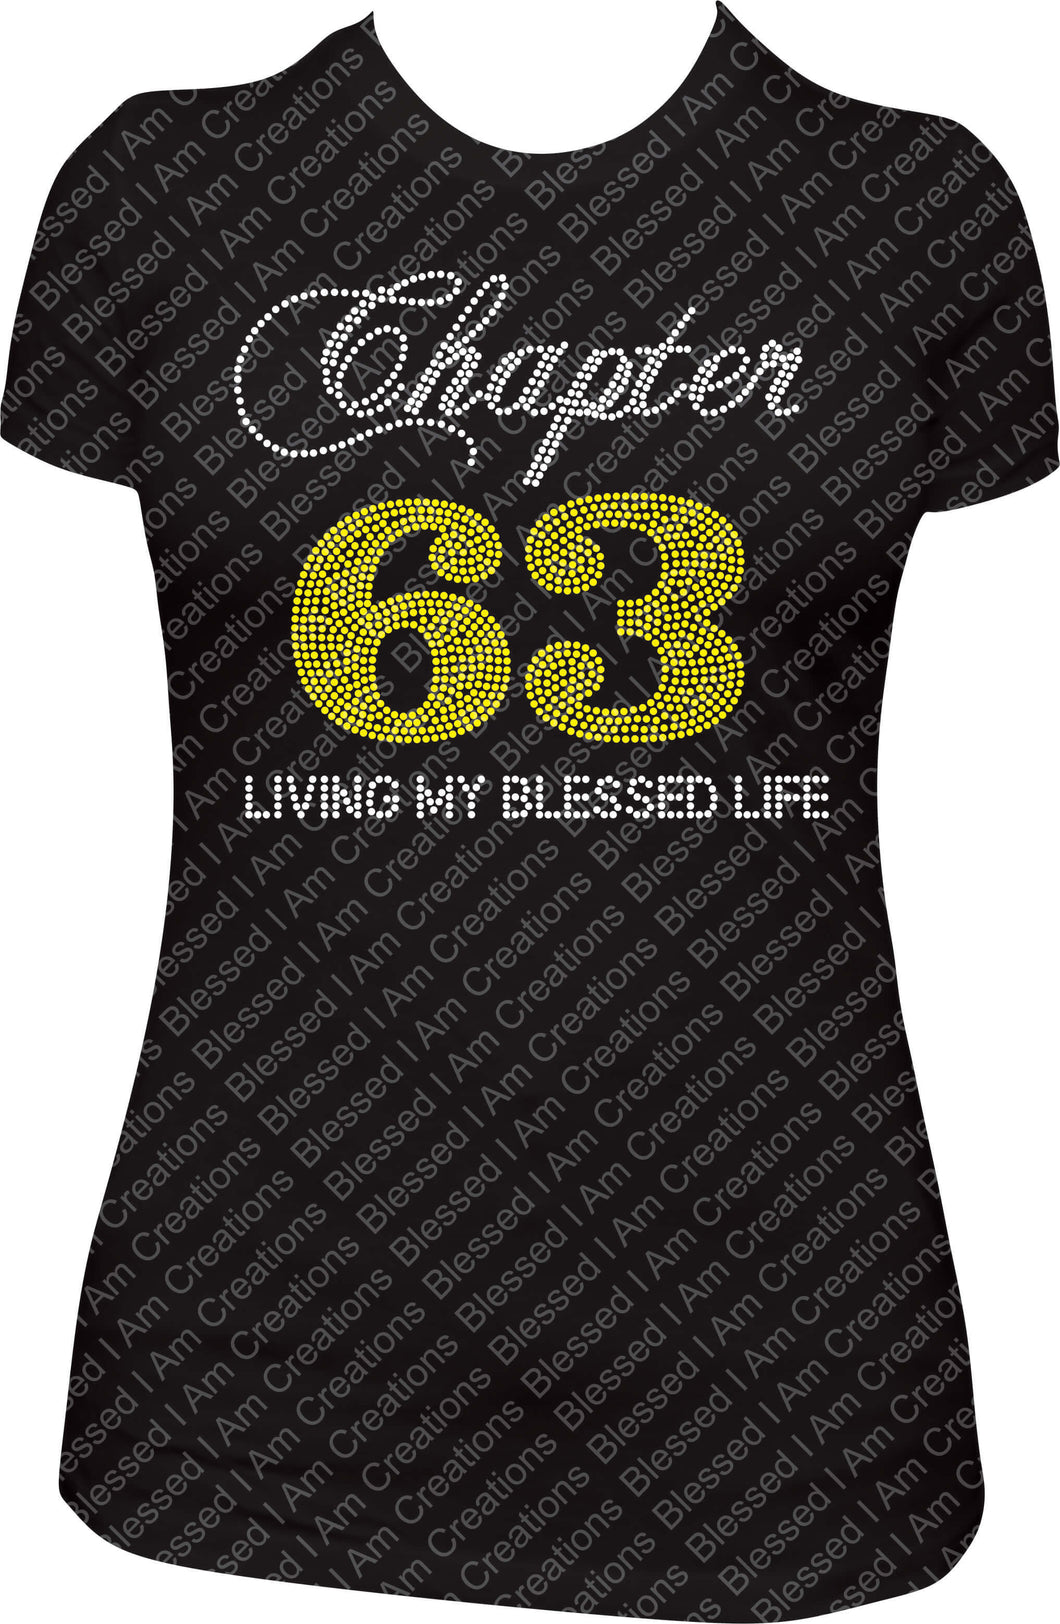 Chapter 63 bling shirt, chapter 63 birthday shirt, rhinestone shirt, rhinestone birthday shirt, bling shirt, bling birthday shirt, chapter birthday shirt, living my blessed life shirt,